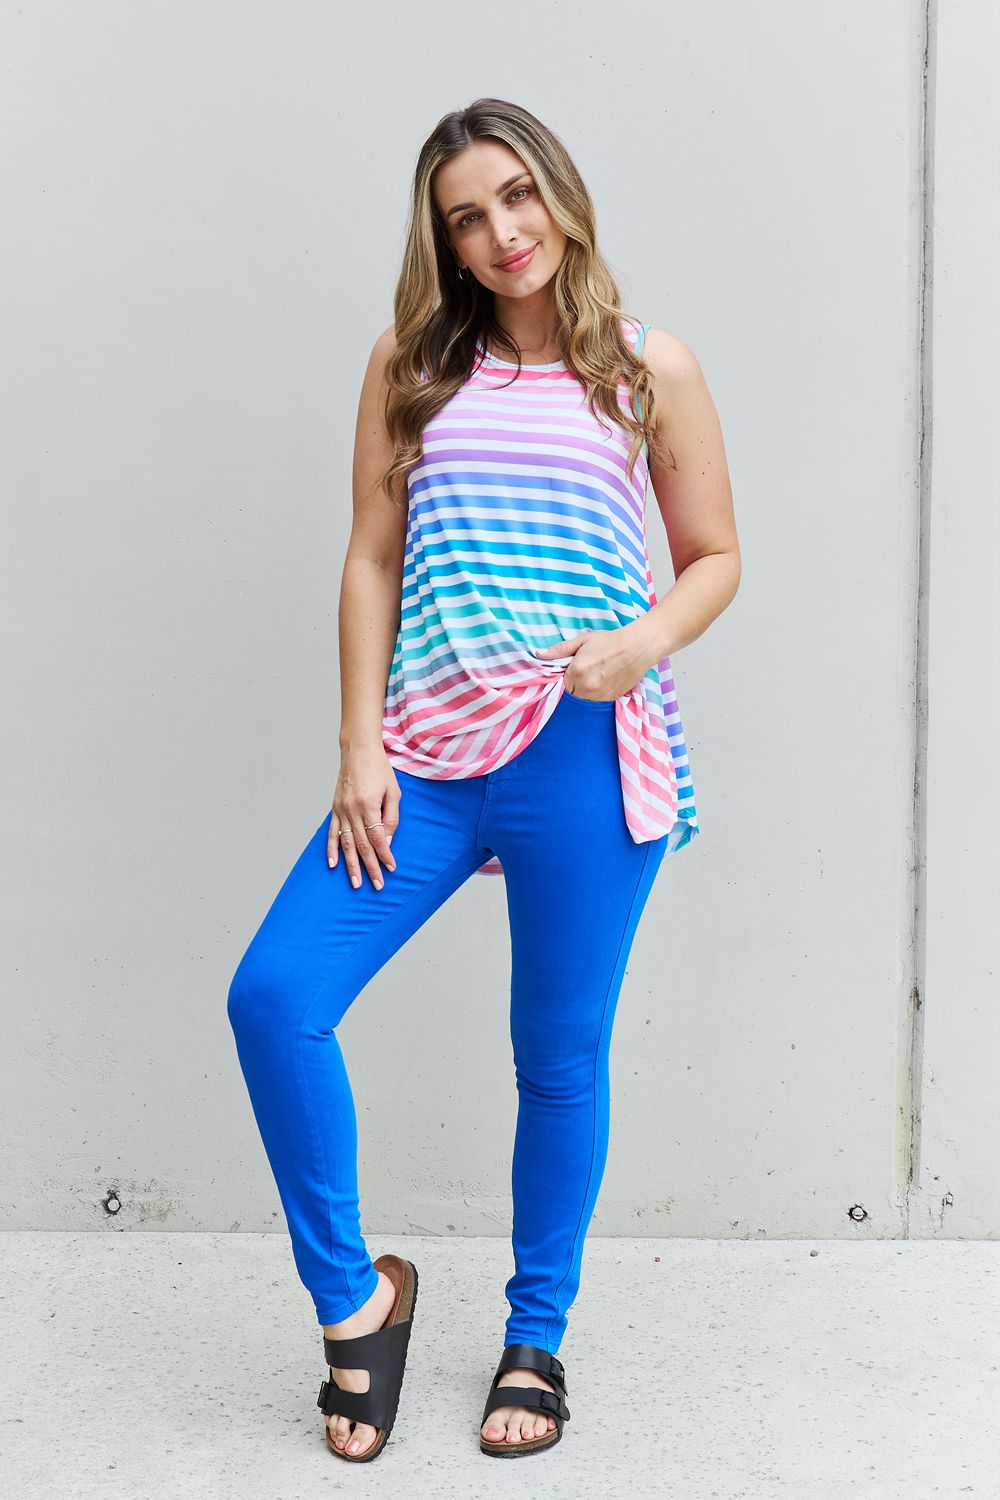 Multicolored Striped Sleeveless Round Neck Top